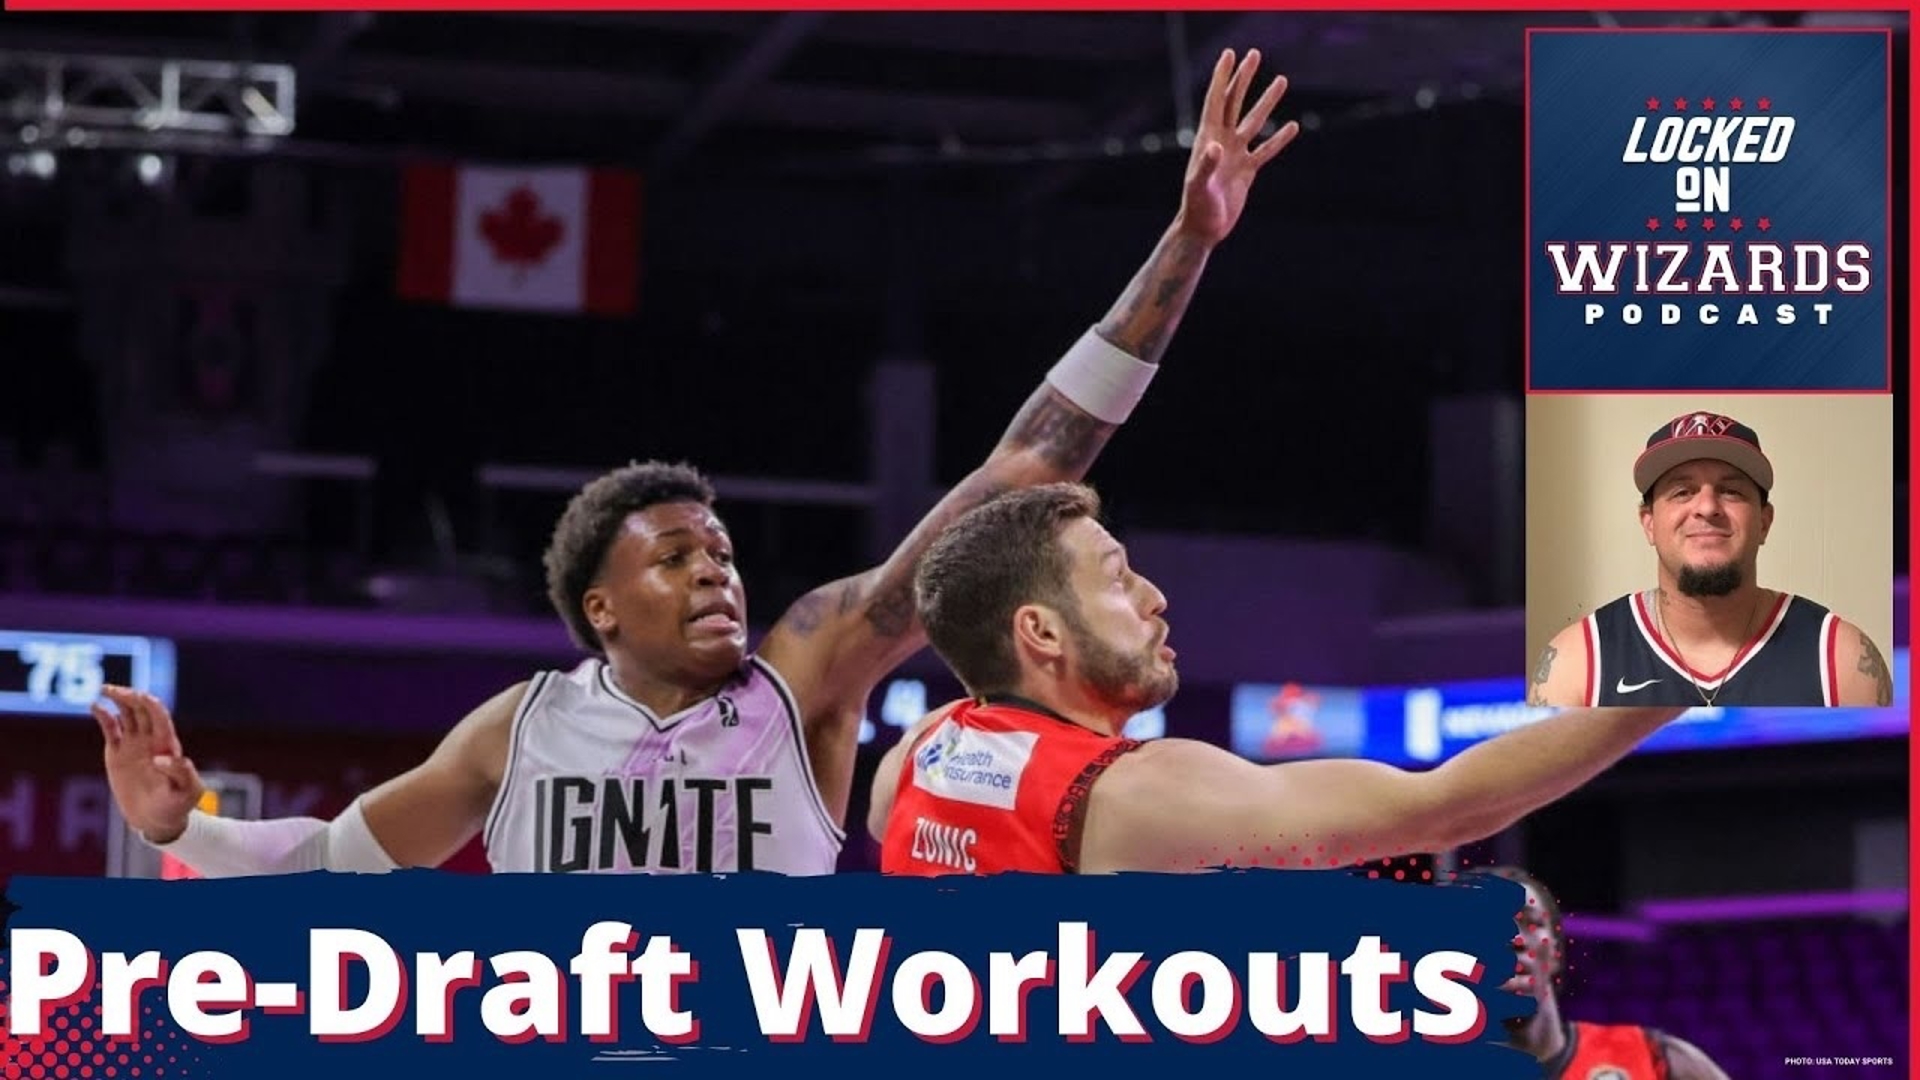 Brandon reviews the list of players that the Wizards brought in for Pre-Draft Workouts for this year's draft's 2nd, 26th, and 51st picks.